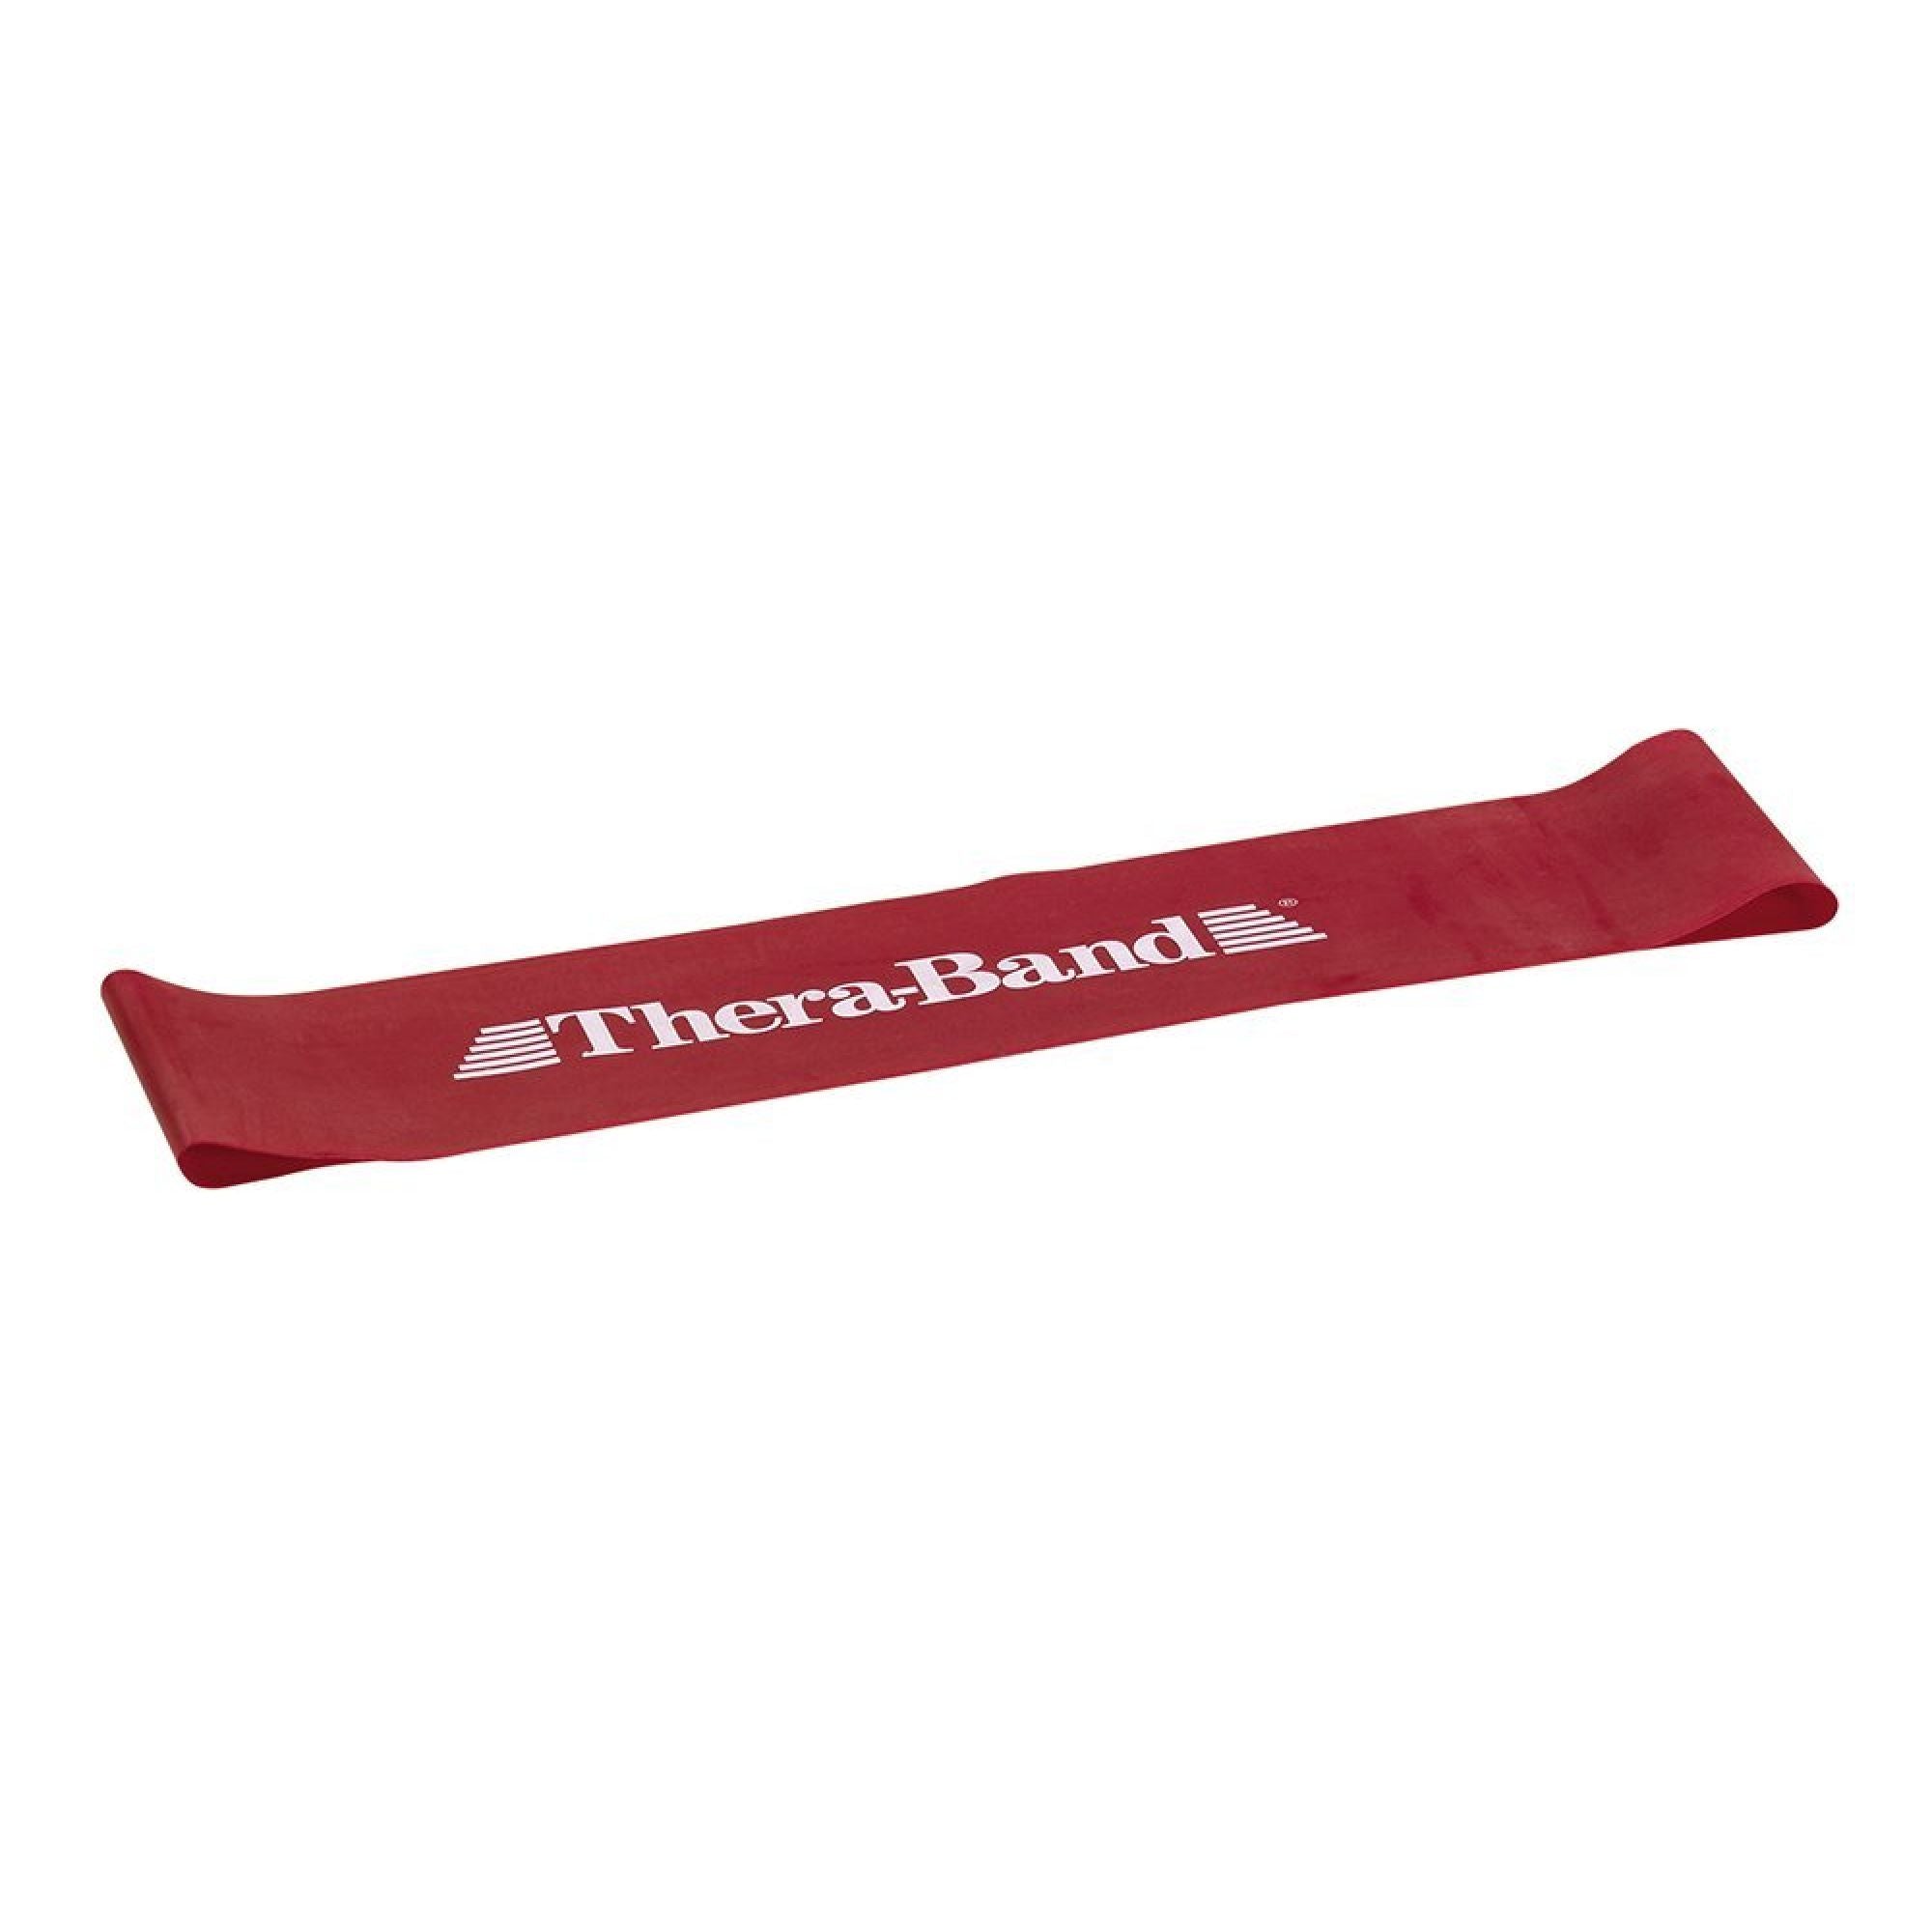 TheraBand Professional Resistance Band Loop